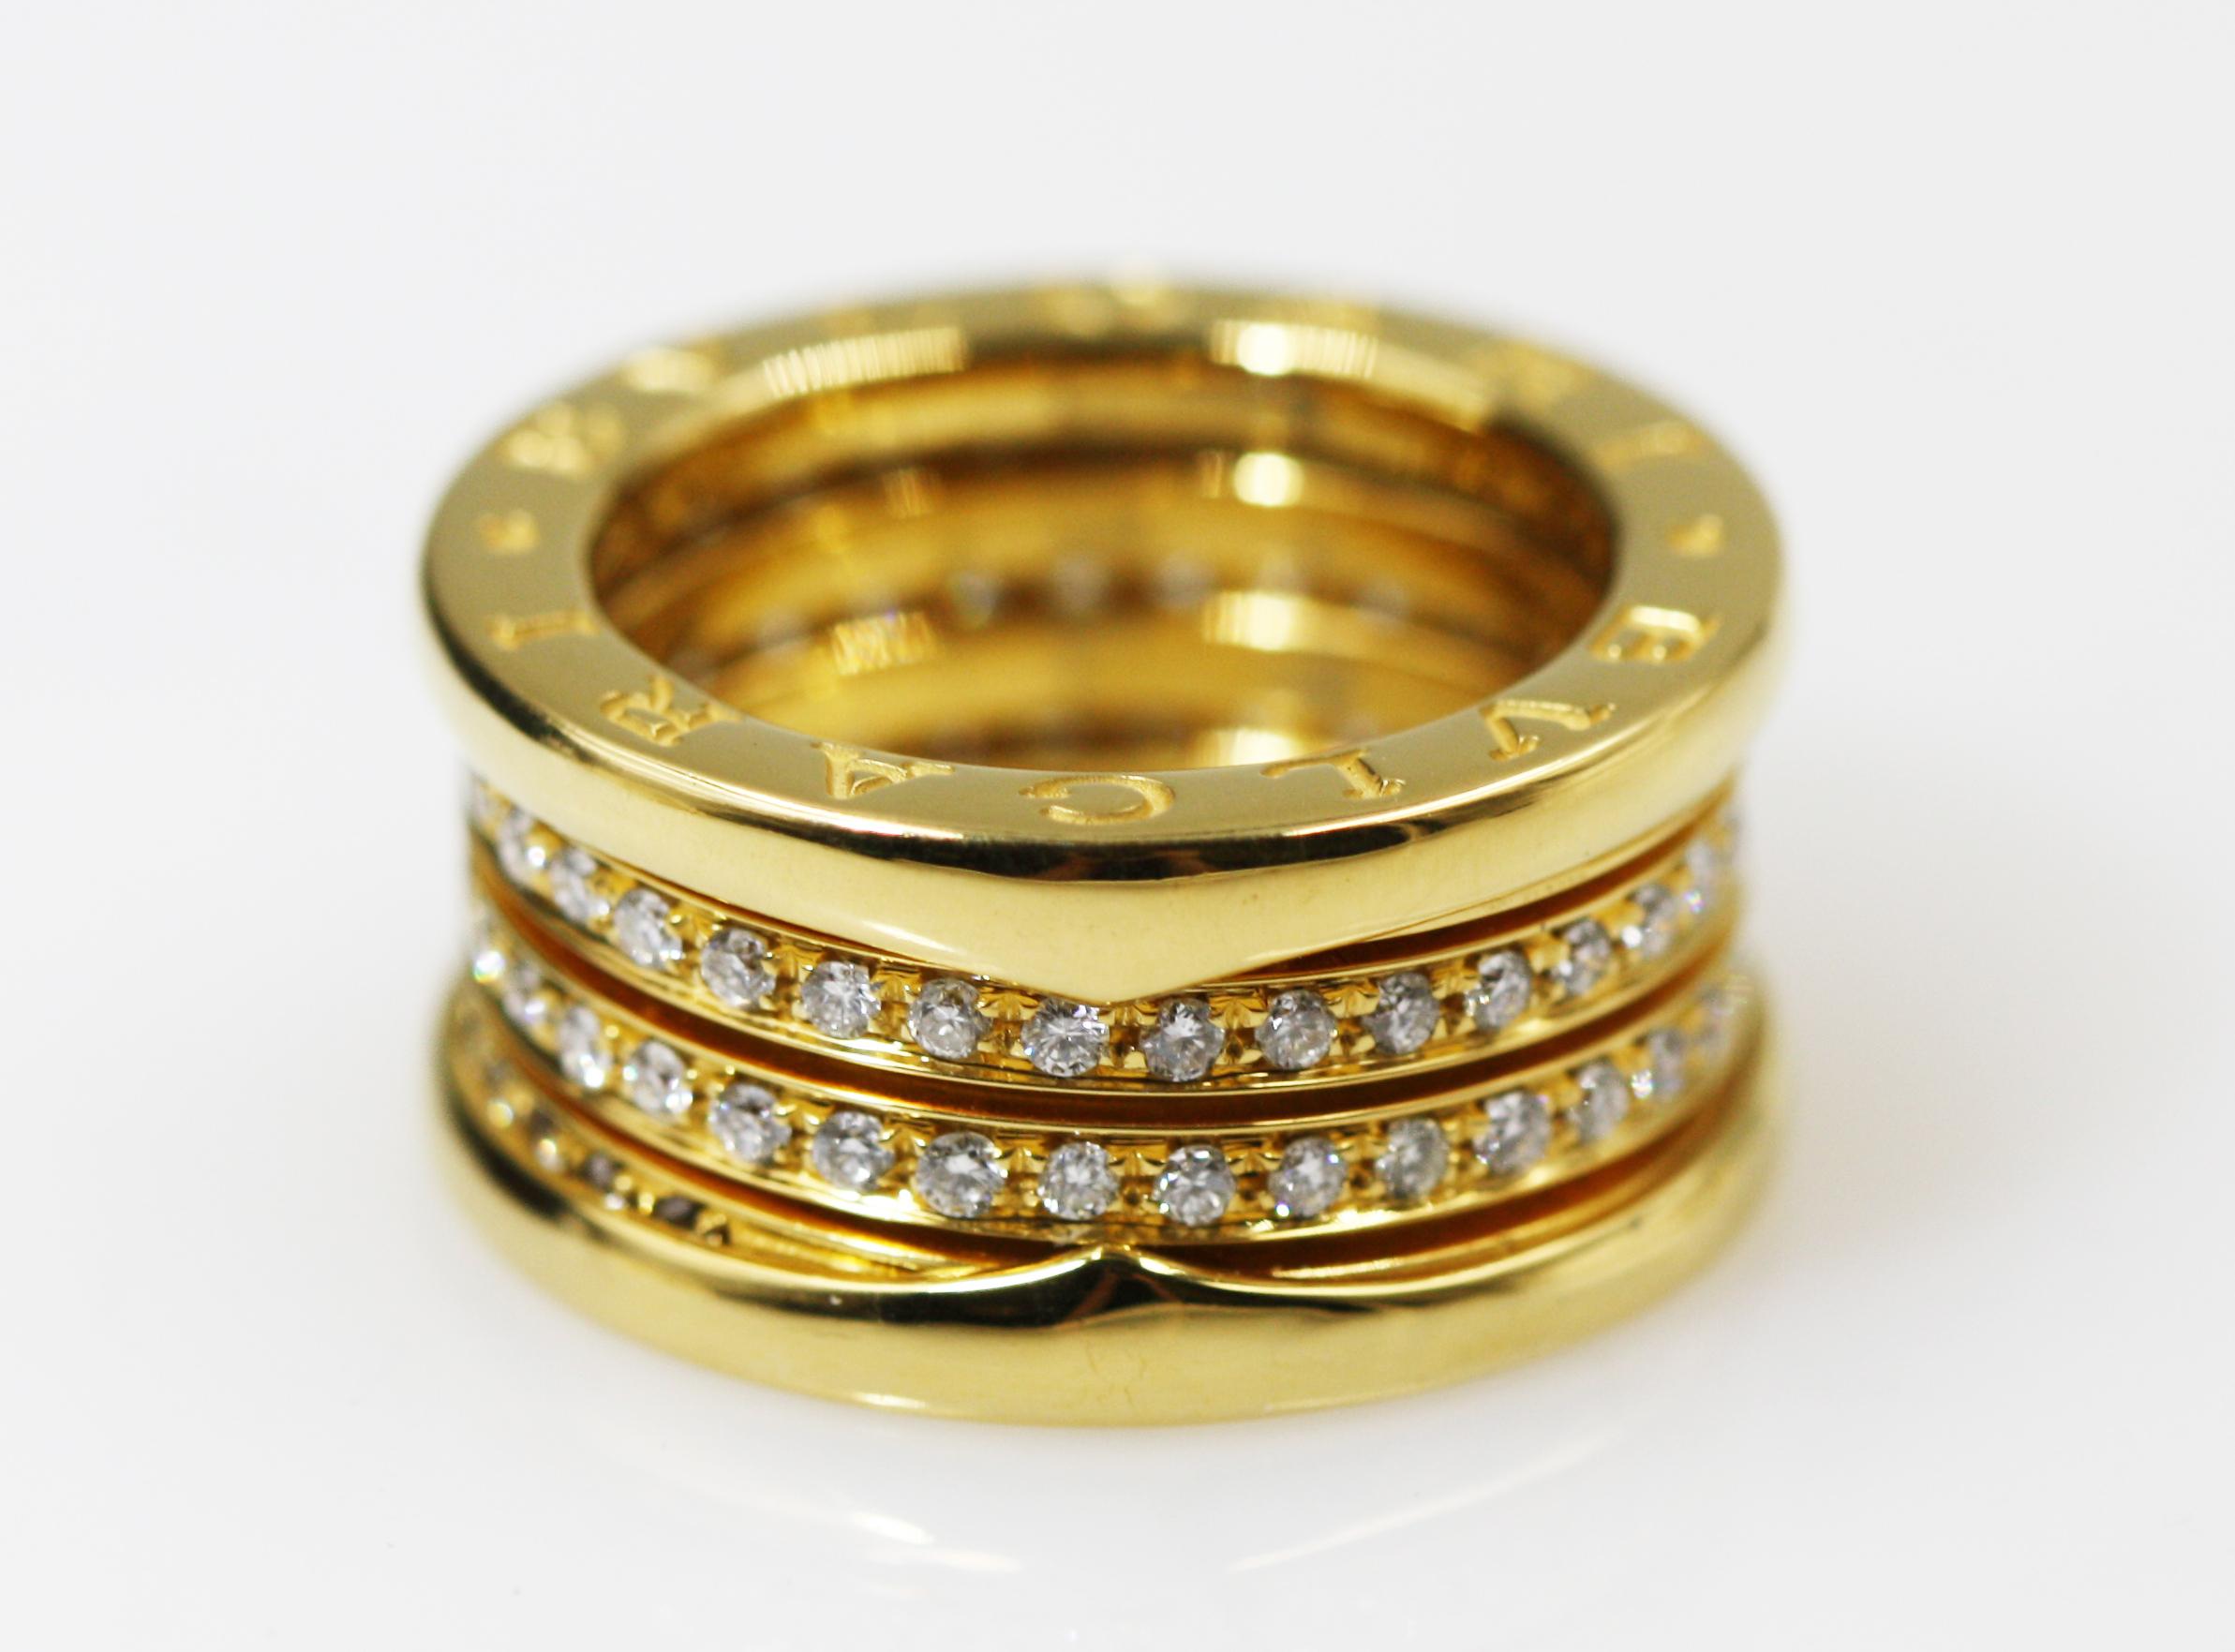 Bvlgari 18 Karat Yellow Gold B Zero1 4 Band Pave Diamond Ring In Excellent Condition For Sale In New York, NY